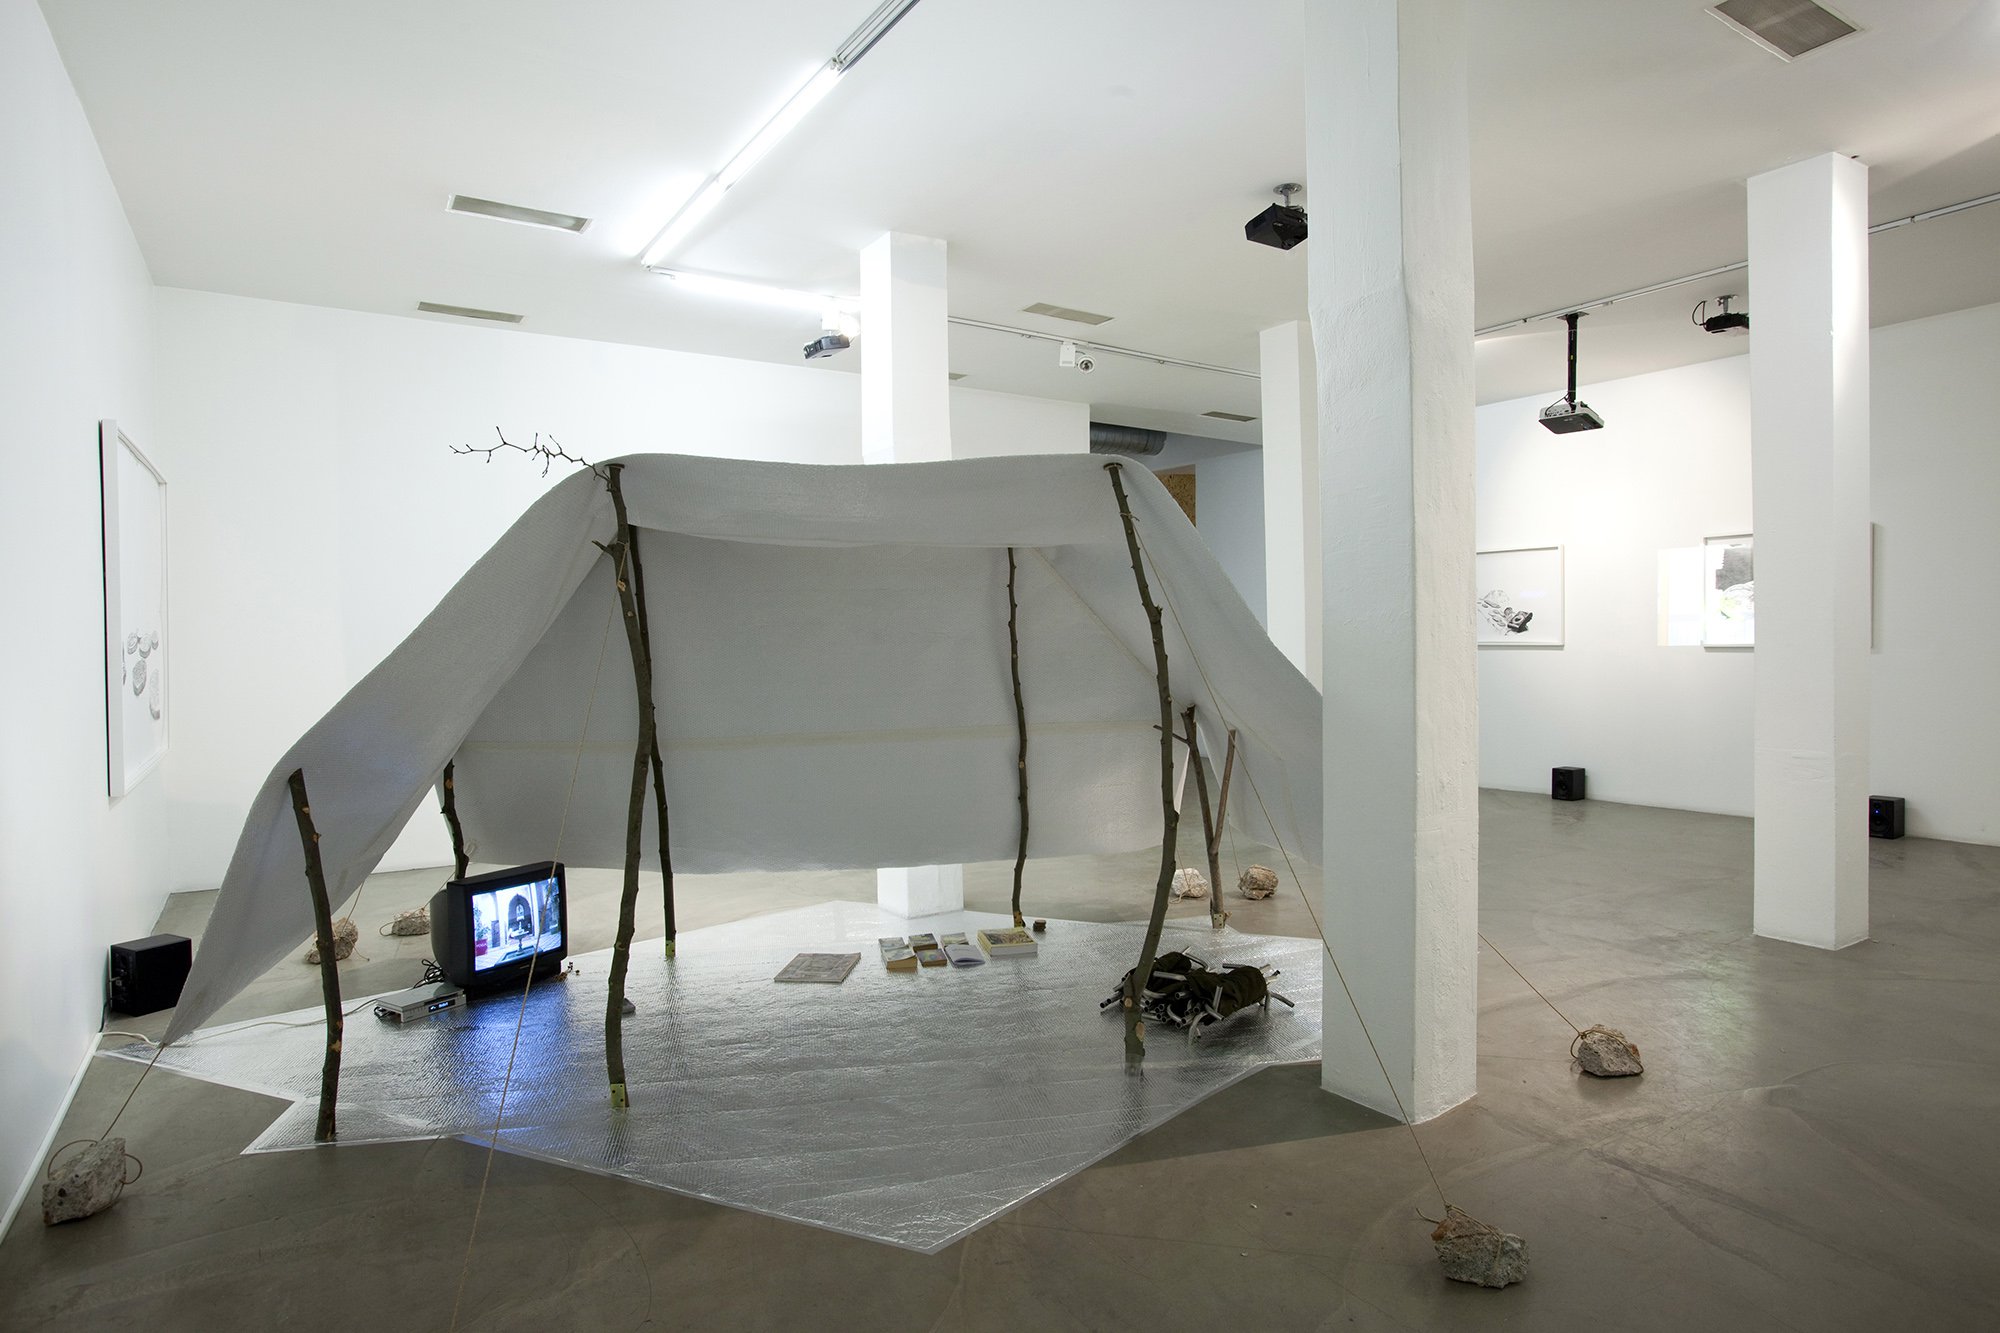 Mark Aerial Waller, The Cassiopeia Plan, thermal insulation foil, training video + instruction video, 3 chairs, 6 books, 2011 – 2012. Installation view, Offering Transmissions, Rodeo, Istanbul, 2012